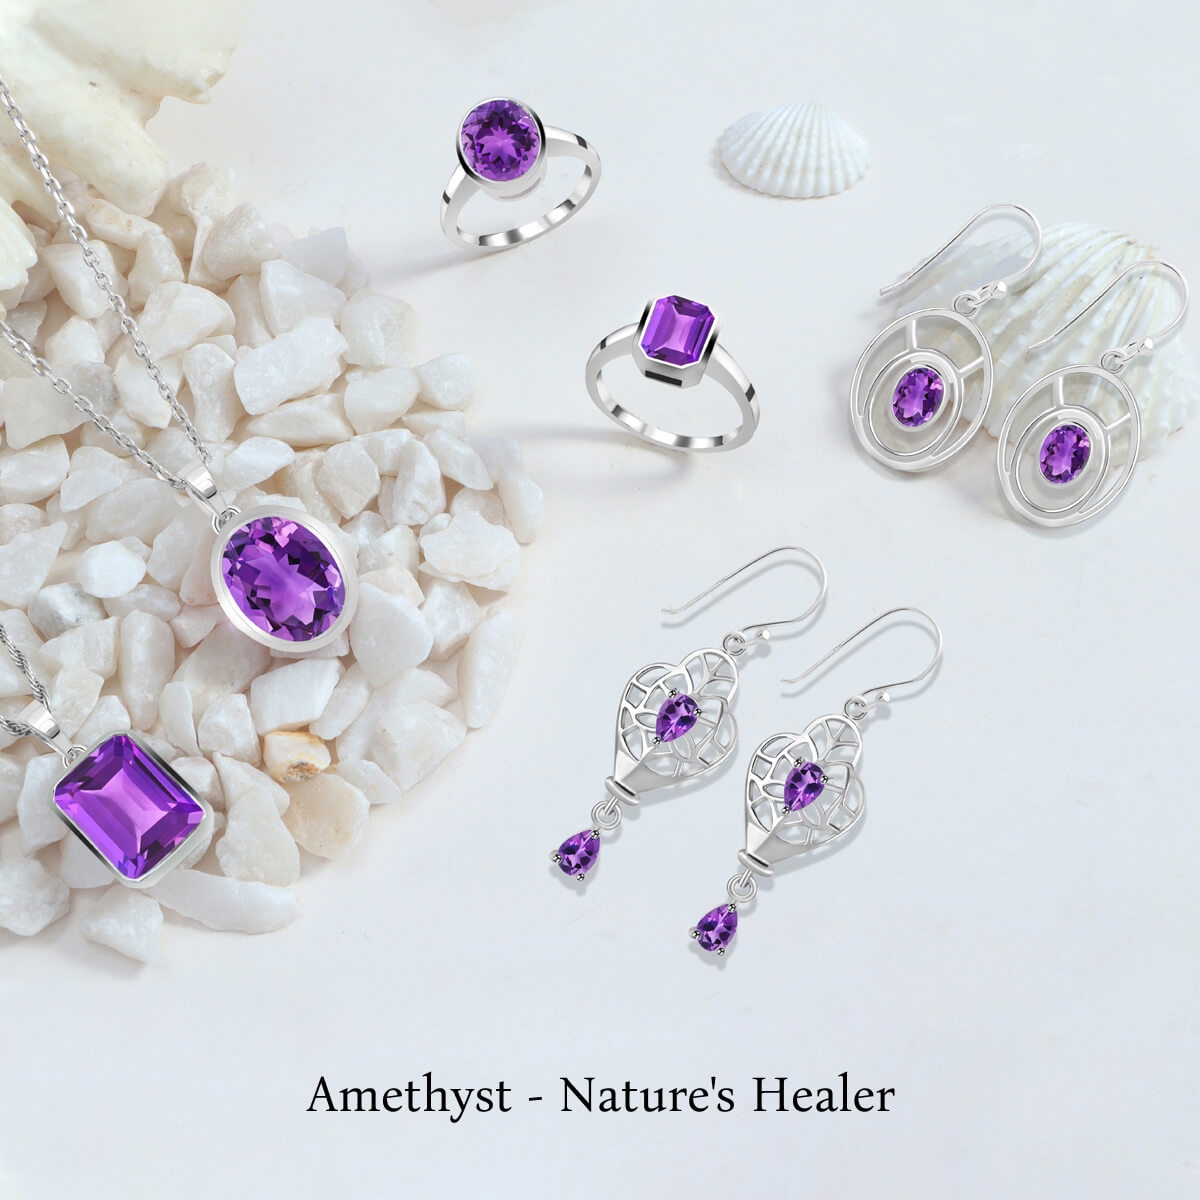 What is Amethyst good for?